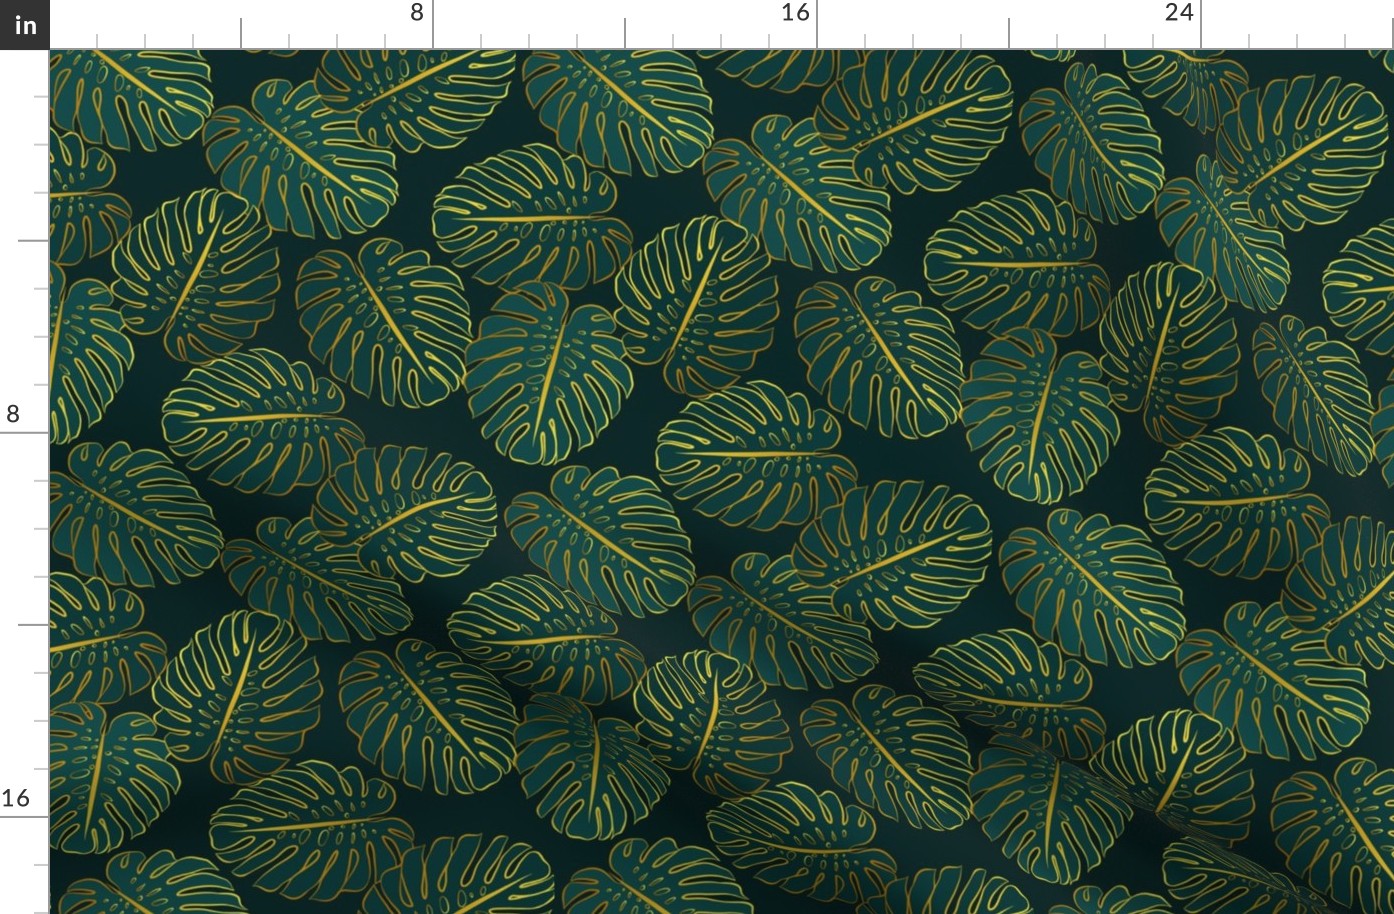 Gilded Monstera Leaves in Teal and Gold